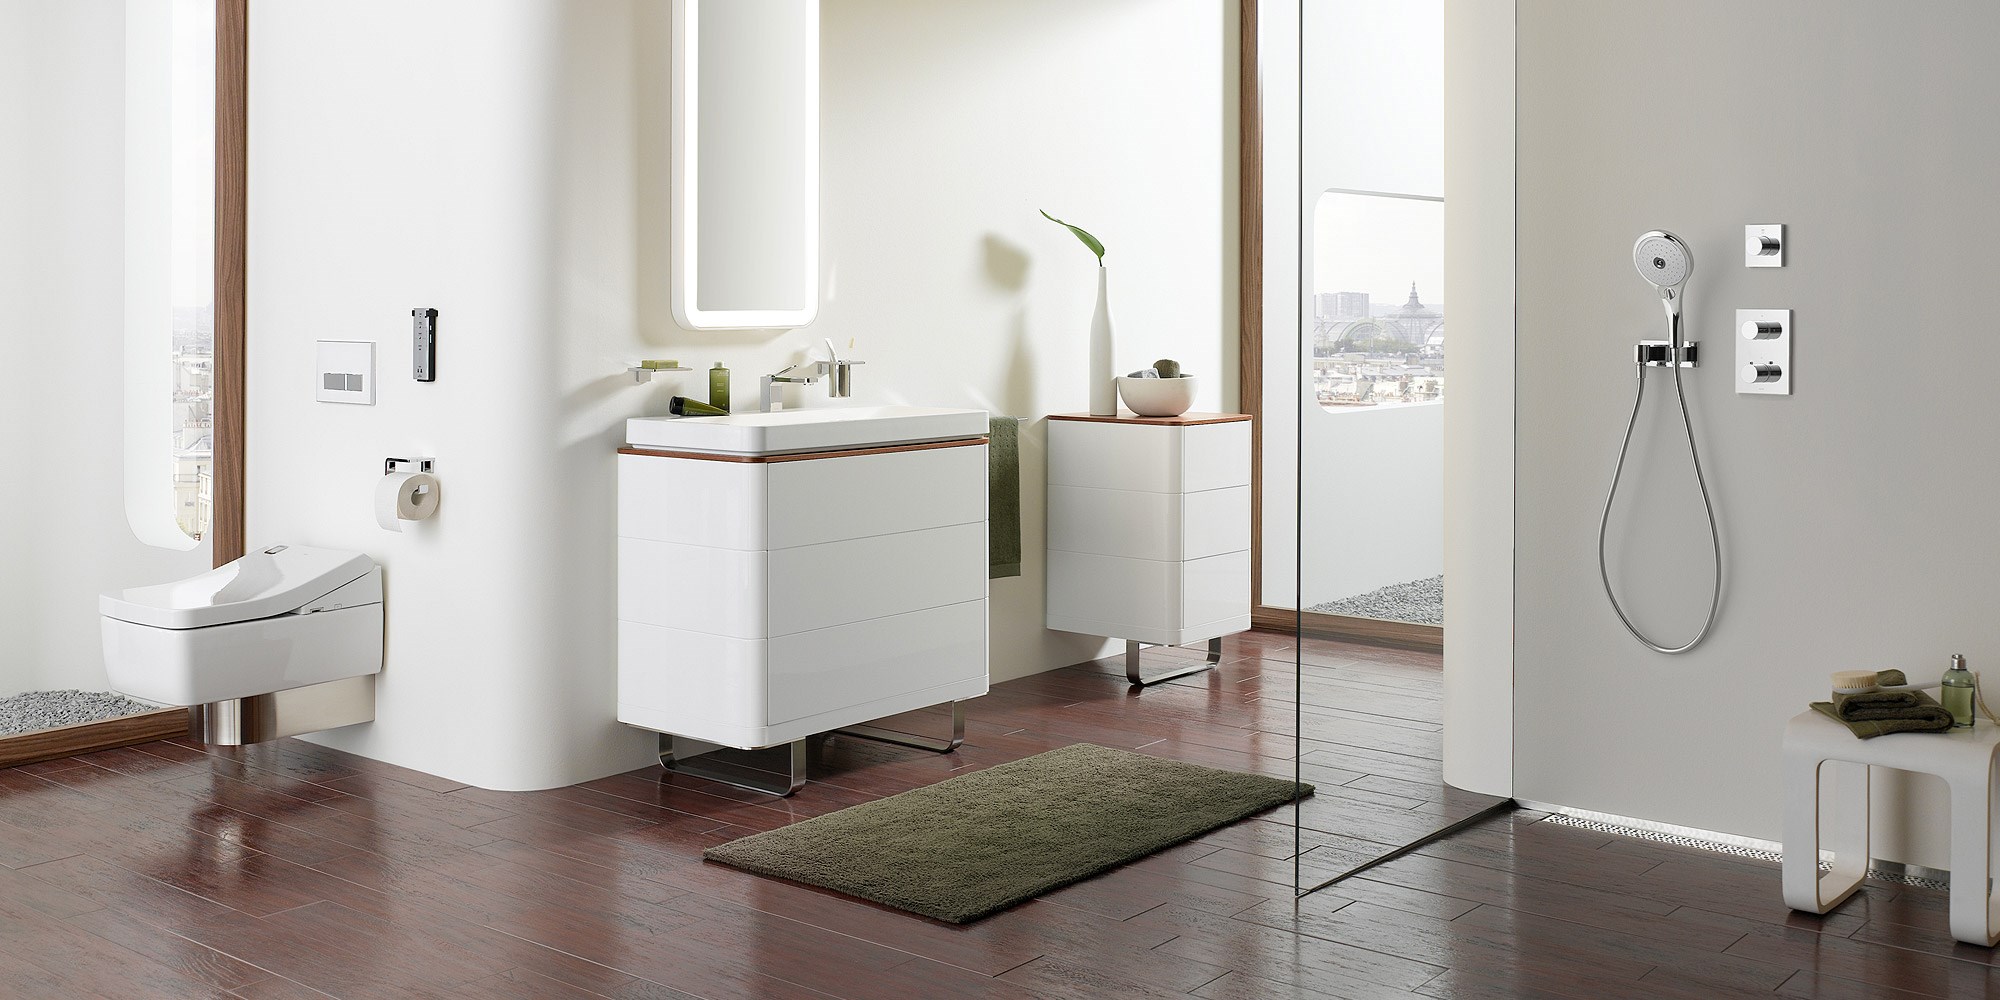 TOTO - Japan’s leading producer of sanitary ware